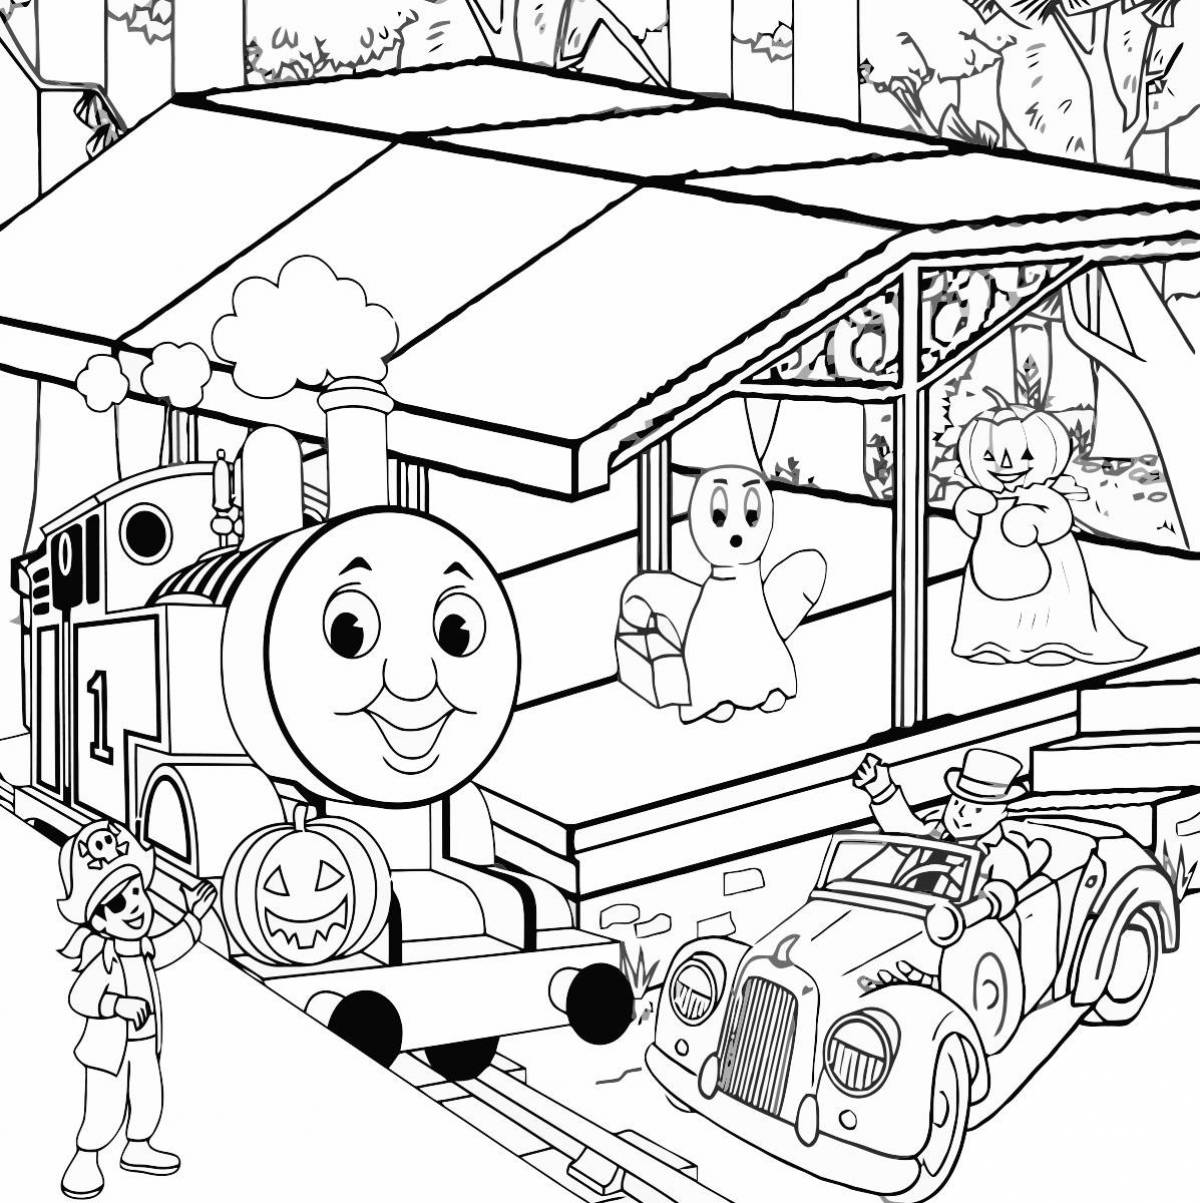 Coloring page impressive thomas the tank engine